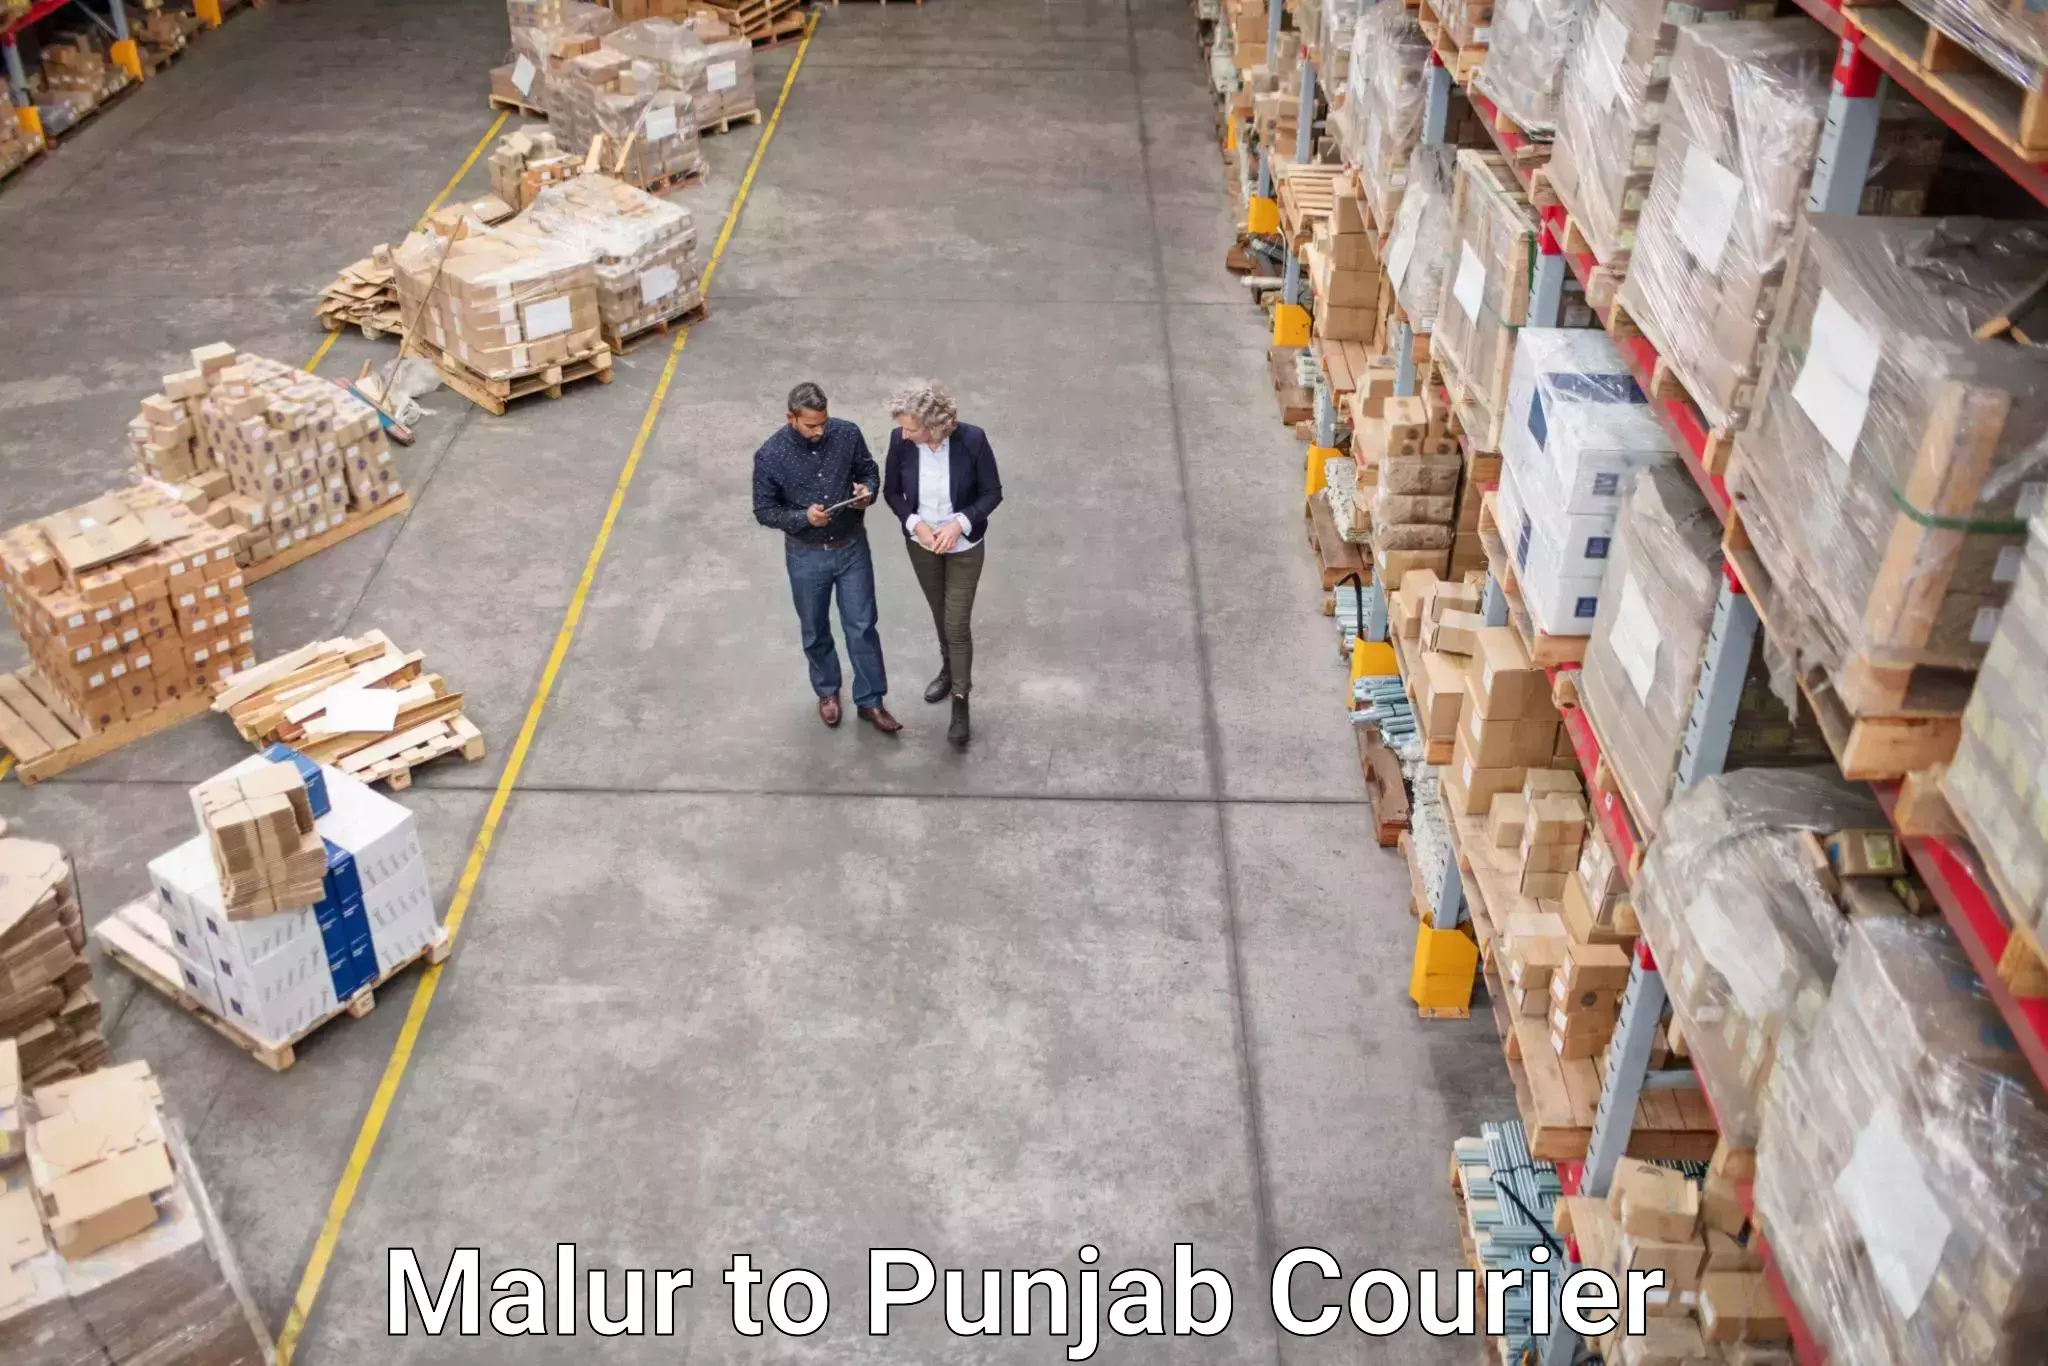 Sustainable courier practices Malur to Faridkot